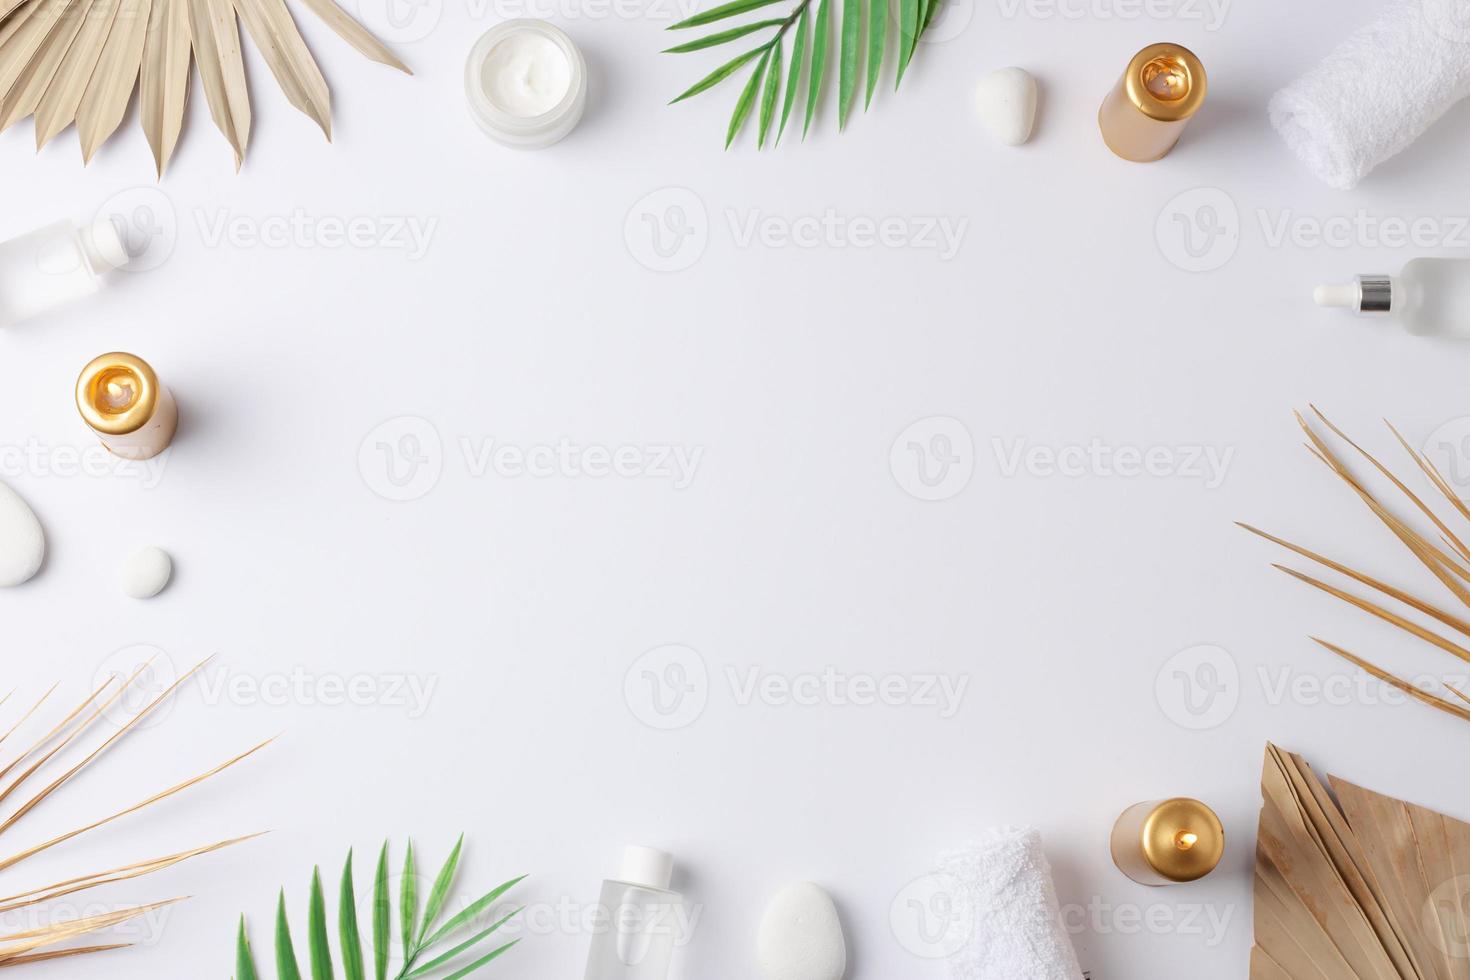 Spa treatment with cosmetic bottle, candles and palm leaf on white background. Flat lay, copy space photo